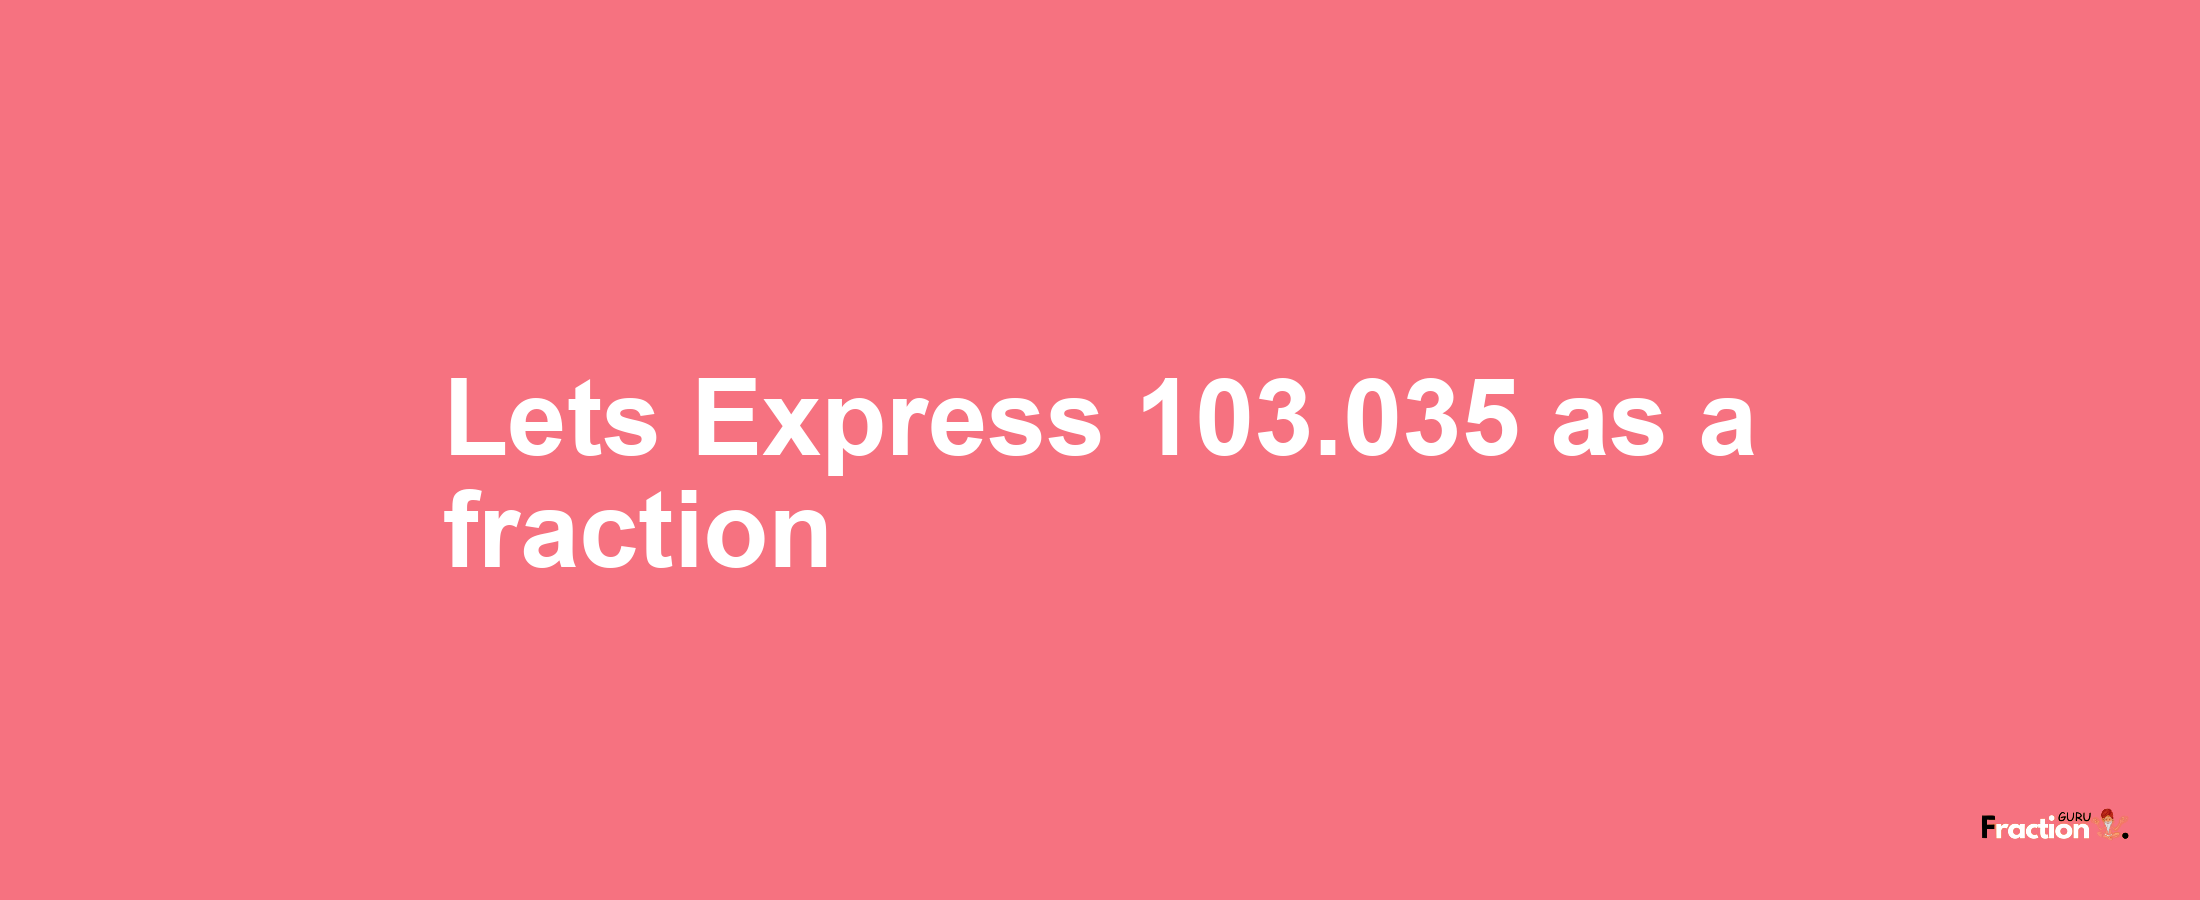 Lets Express 103.035 as afraction